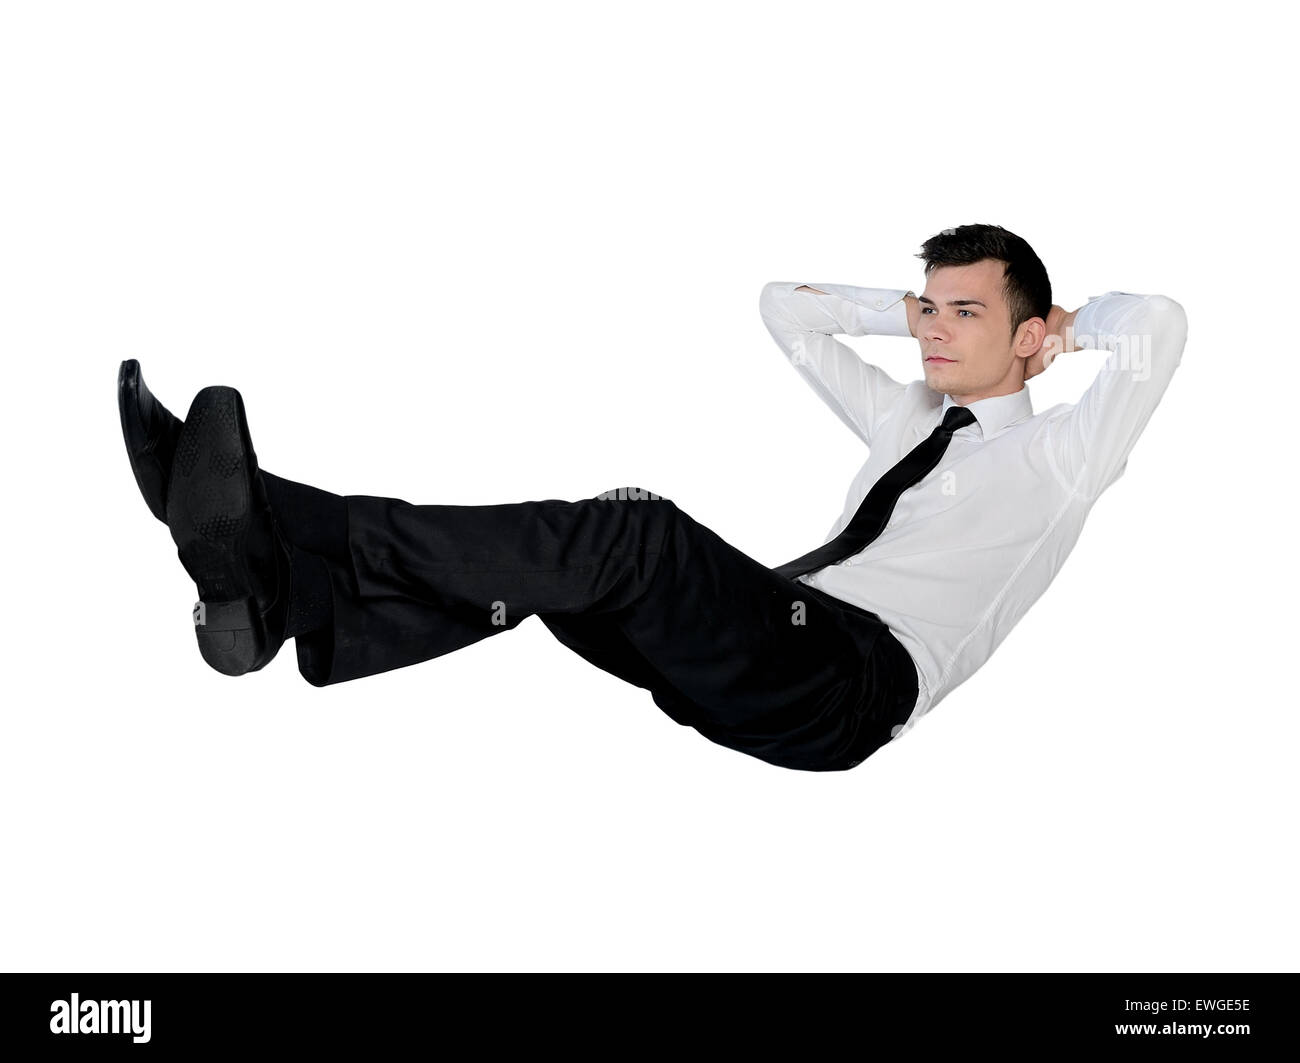 Isolated business man relaxing position Stock Photo - Alamy